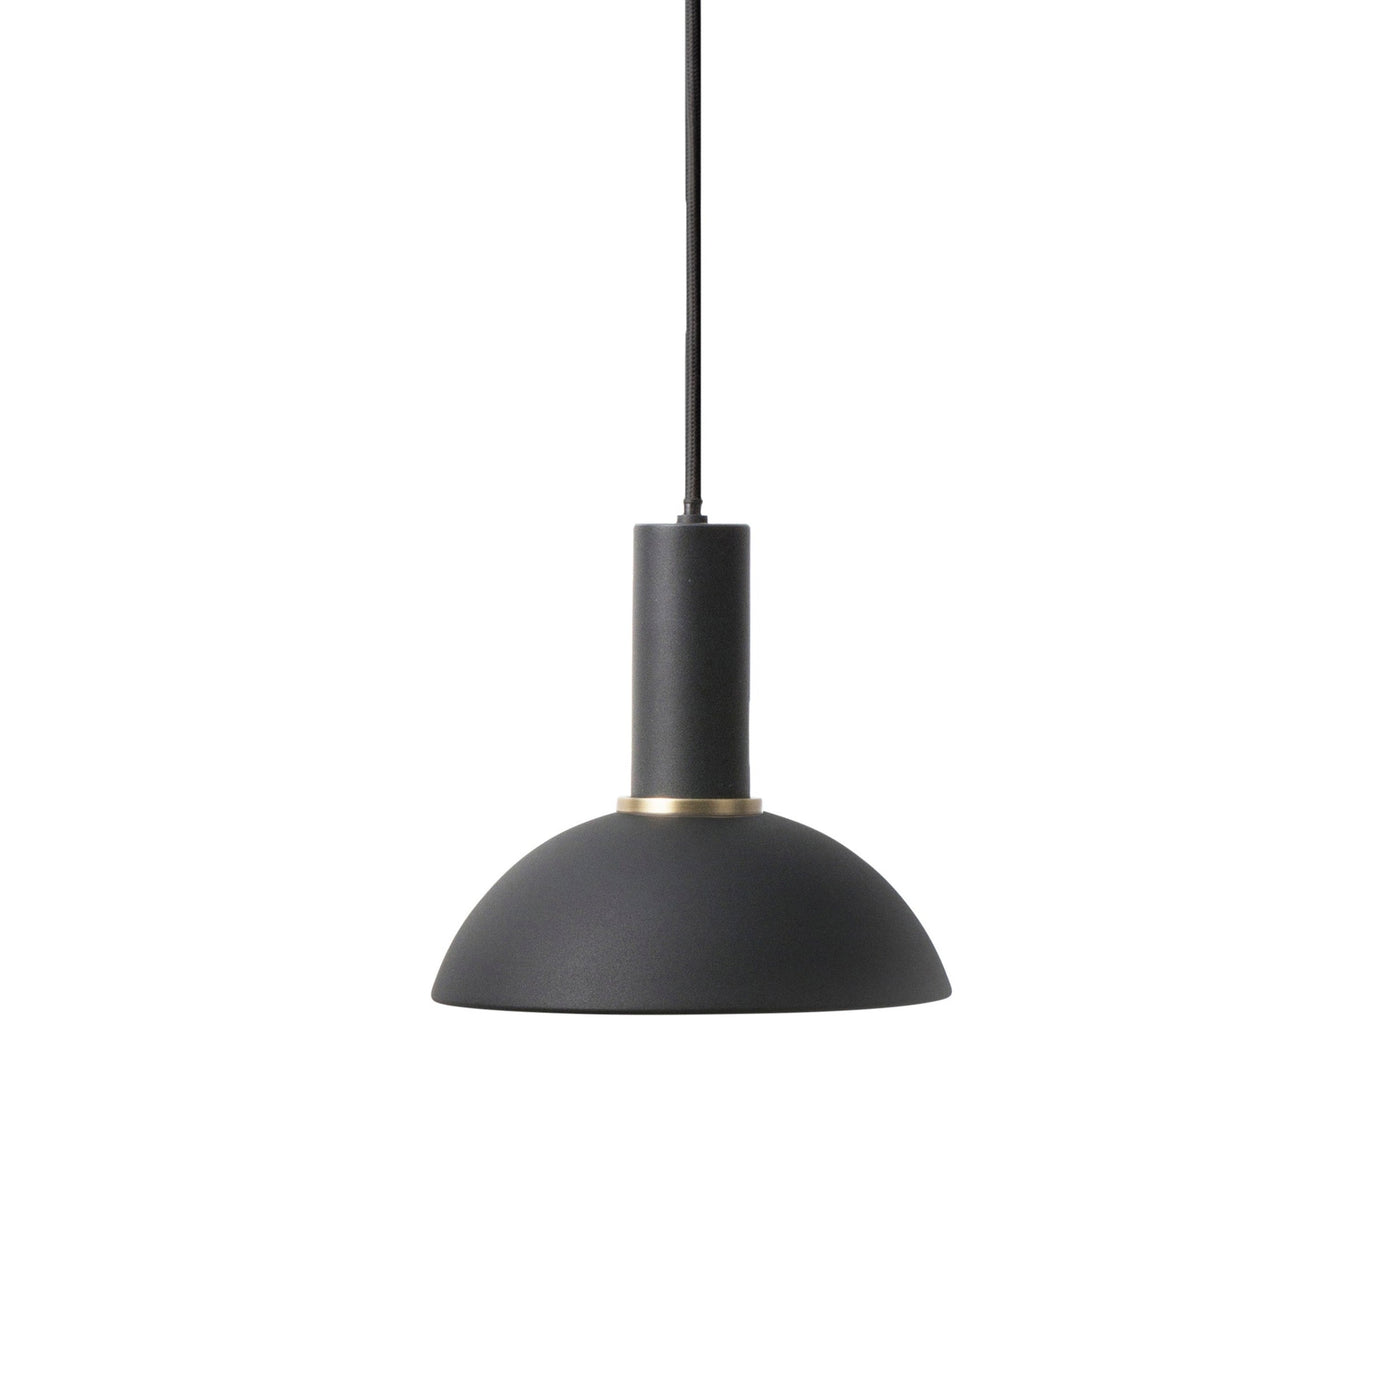 ferm LIVING Collect Lighting hoop Shade. Shop online at someday designs. #colour_black